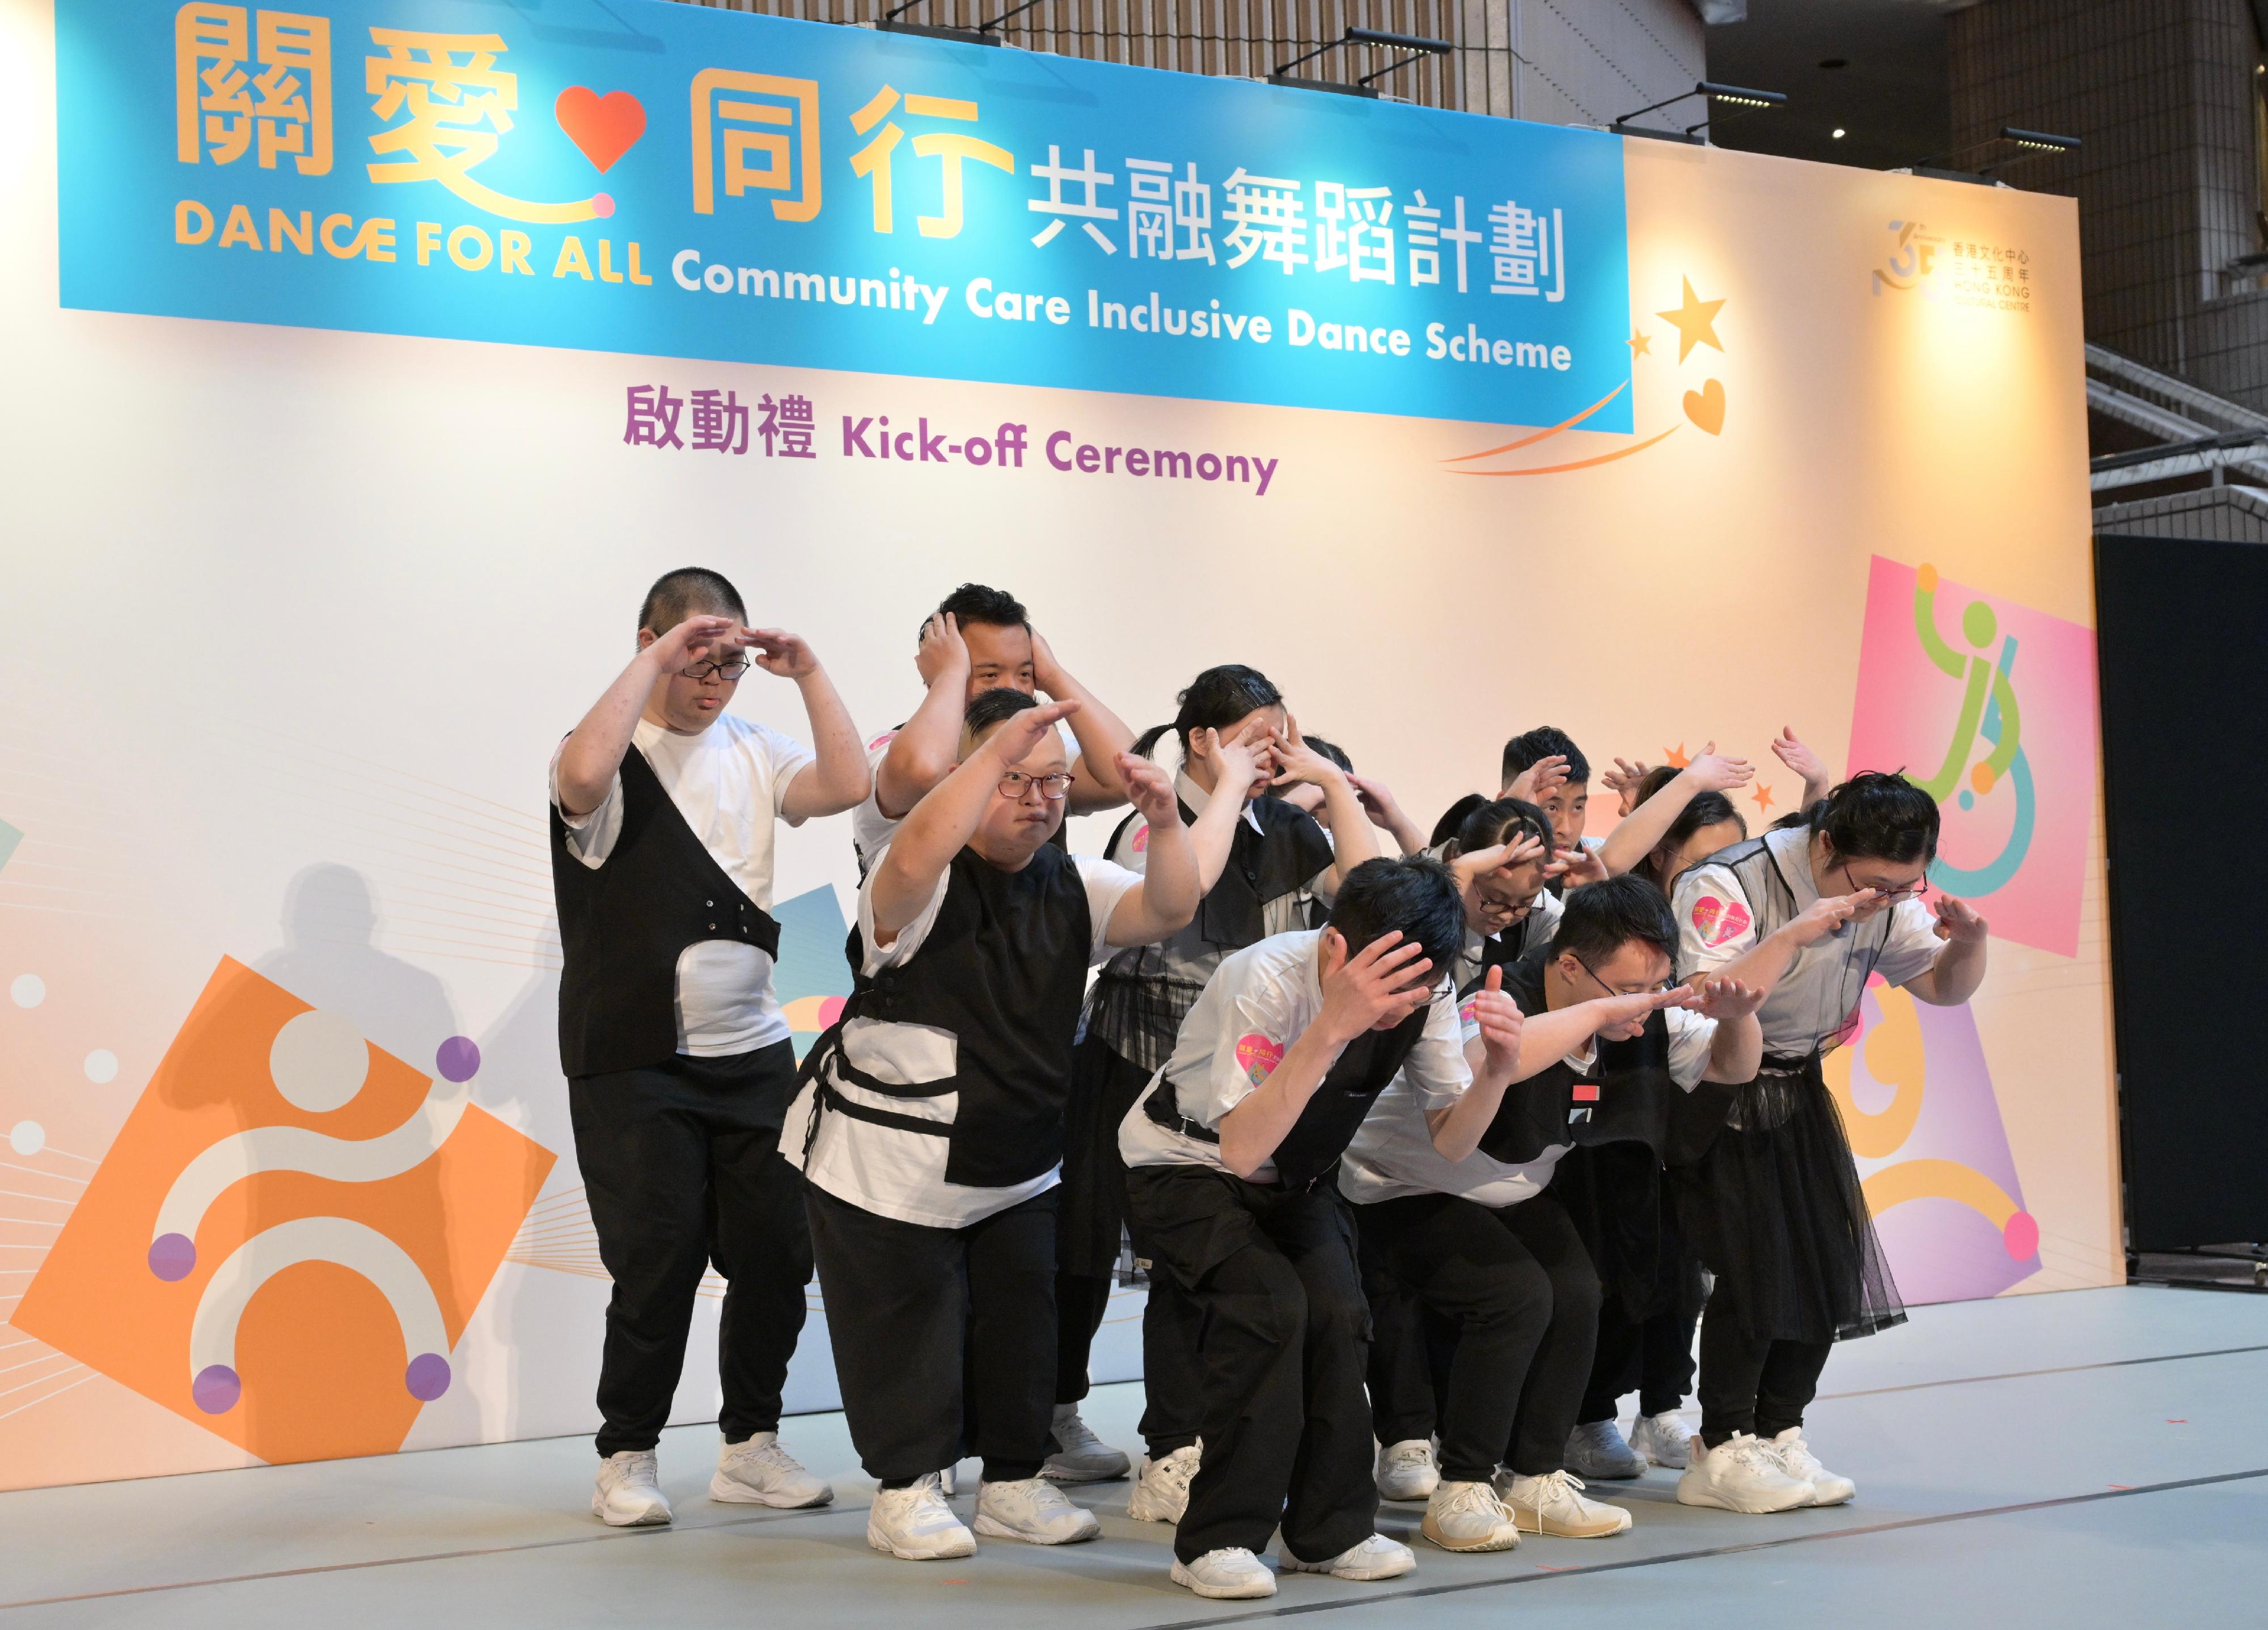 The "Dance for All" Community Care Inclusive Dance Scheme, organised by the Leisure and Cultural Services Department, was launched today (May 5). Photo shows persons with intellectual disabilities in action at the "Dance with Me" inclusive performance.

